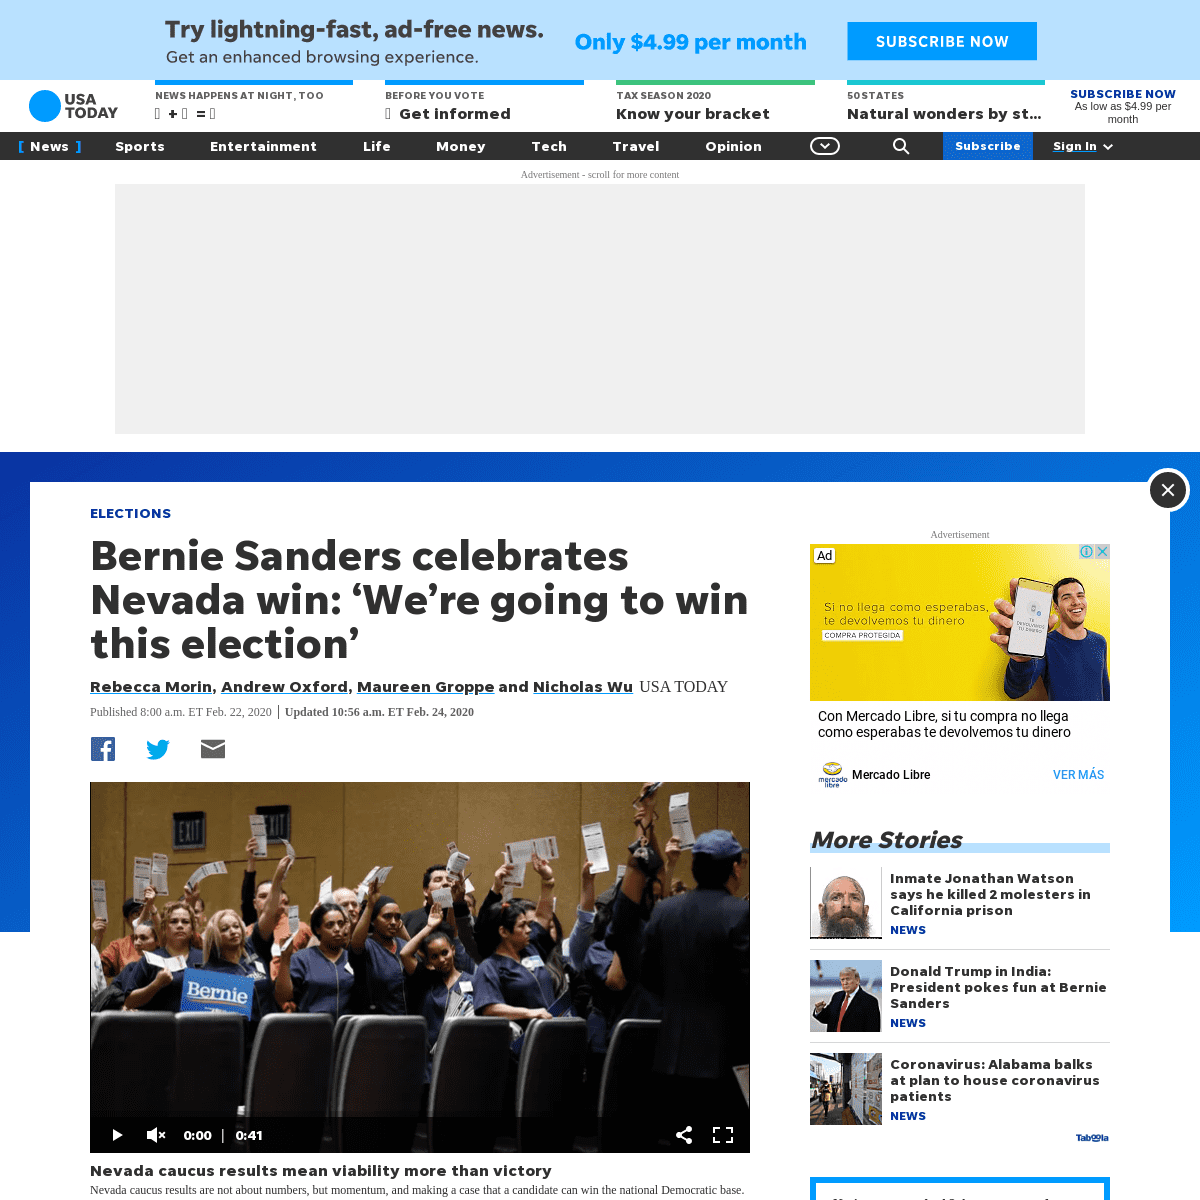 A complete backup of www.usatoday.com/story/news/politics/elections/2020/02/22/nevada-caucuses-bernie-sanders-democrats-look-kee